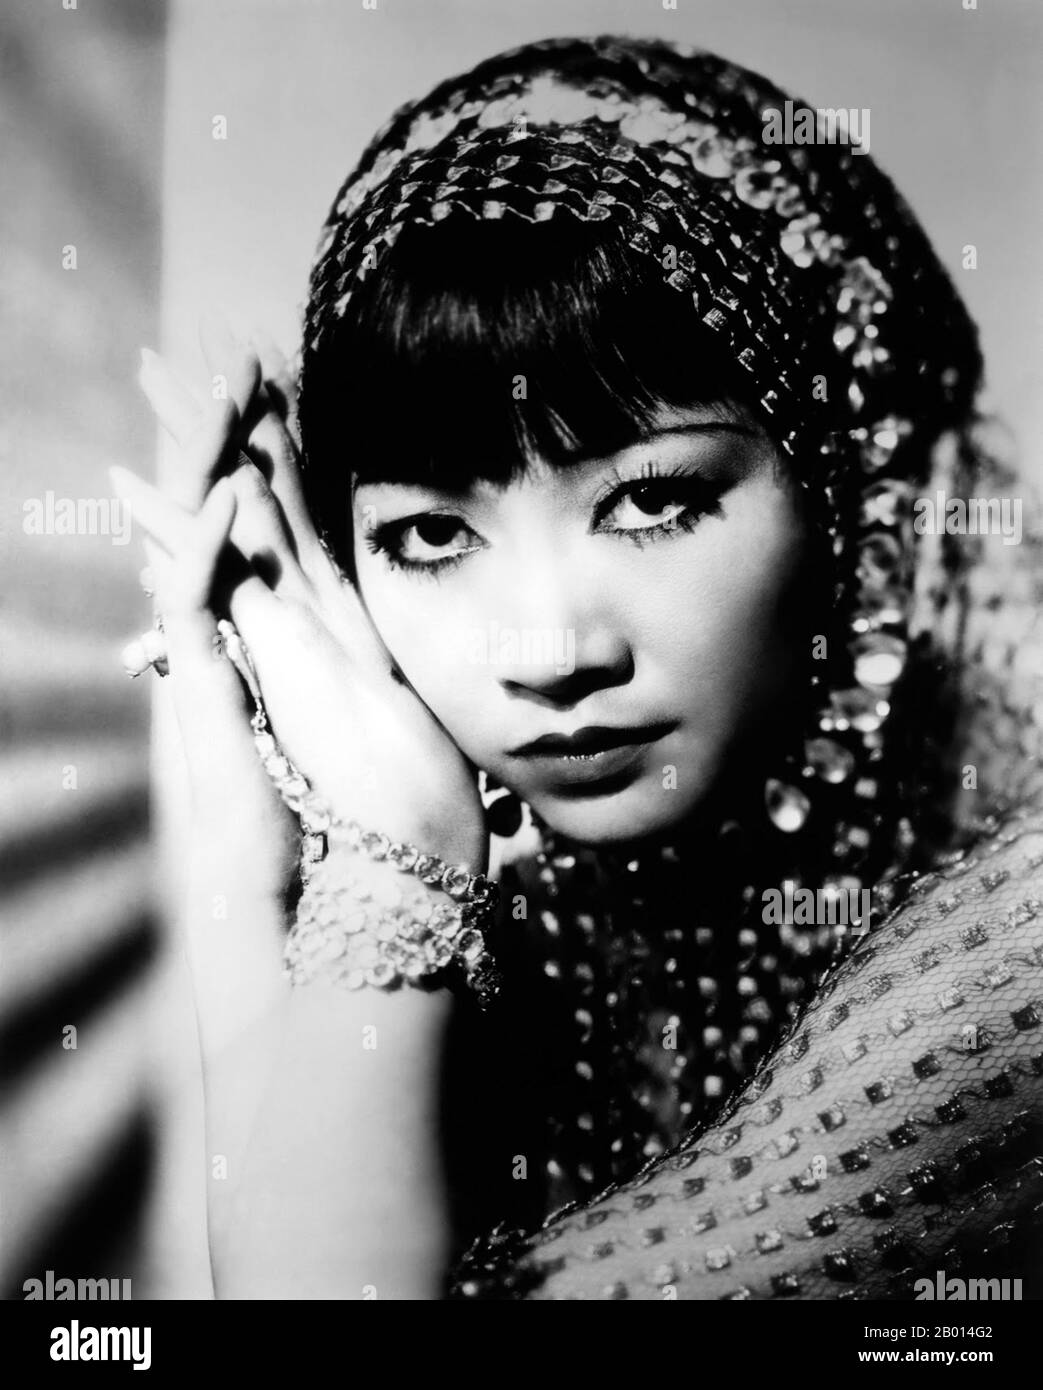 USA: Anna May Wong (January 3, 1905 – February 3, 1961), Chinese-American movie star.  Anna May Wong was an American actress, the first Chinese American movie star, and the first Asian American to become an international star. Her long and varied career spanned both silent and sound film, television, stage, and radio.  Born near the Chinatown neighborhood of Los Angeles to second-generation Chinese-American parents, Wong became infatuated with the movies and began acting in films at an early age. Stock Photo